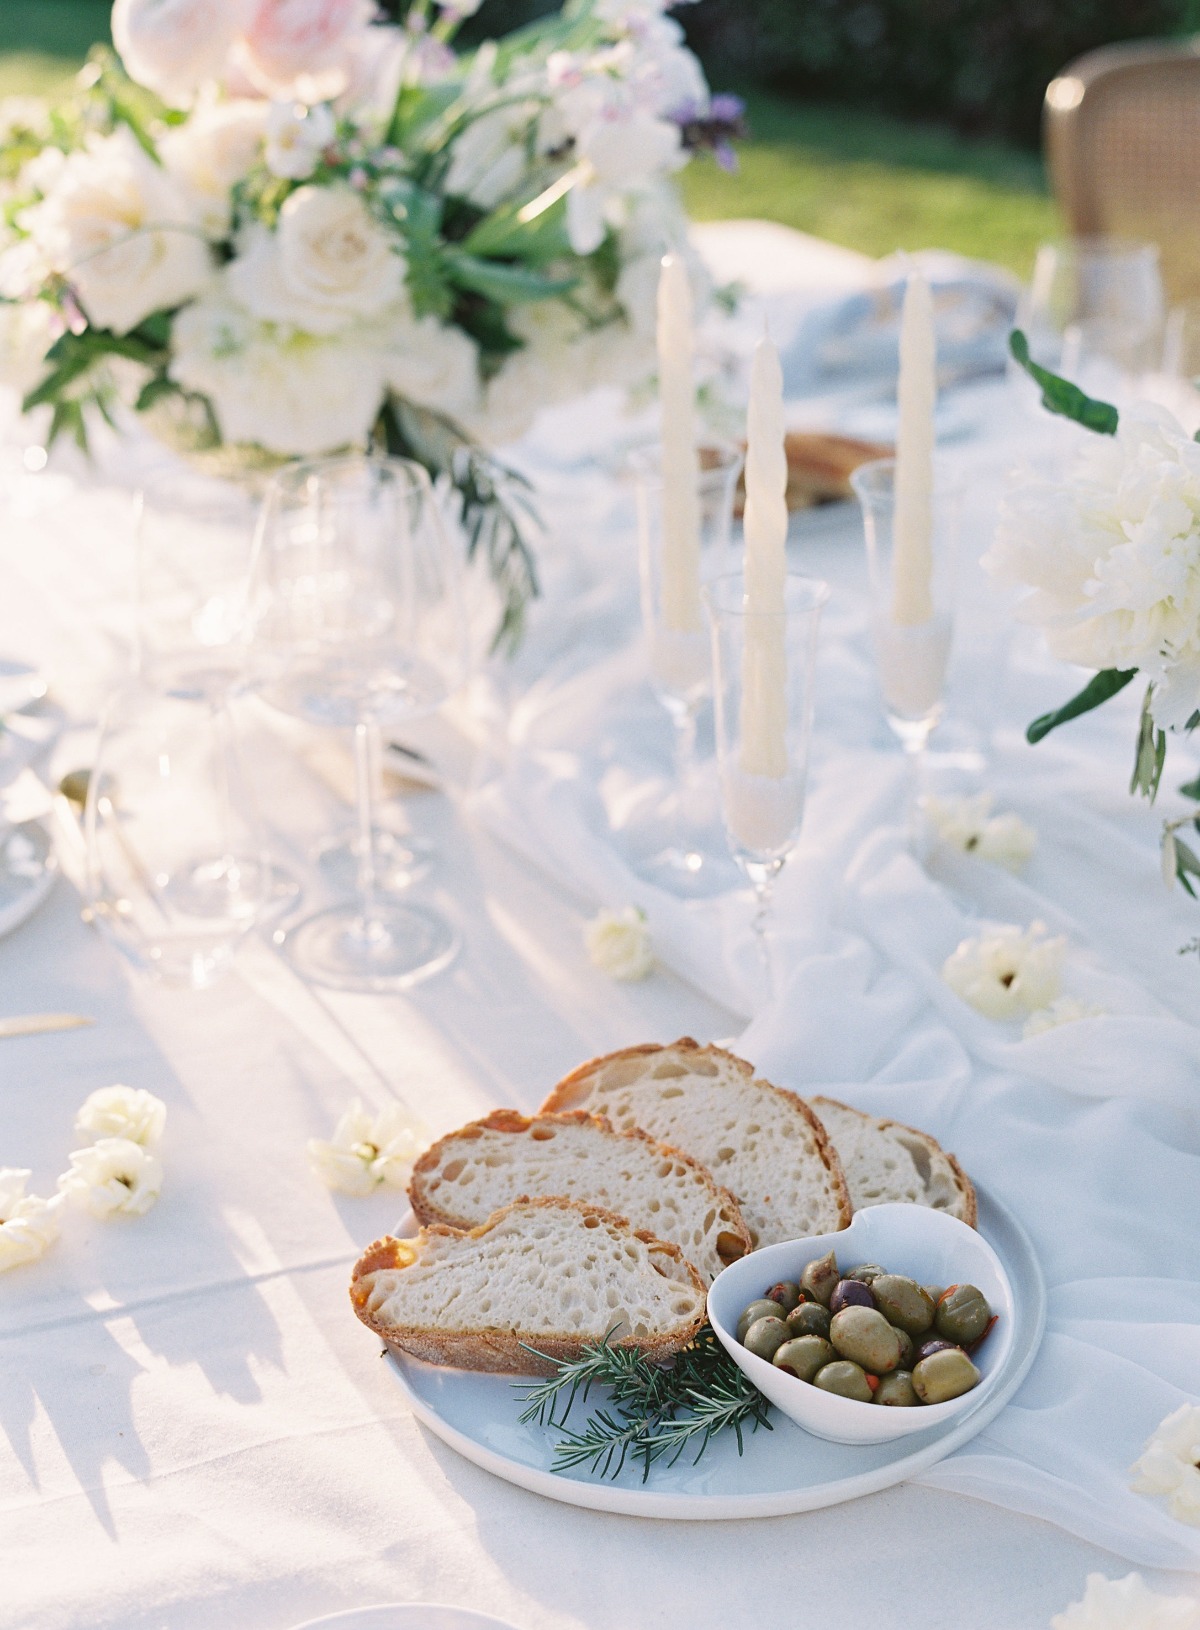 Italian wedding reception with fresh olives and baked bread